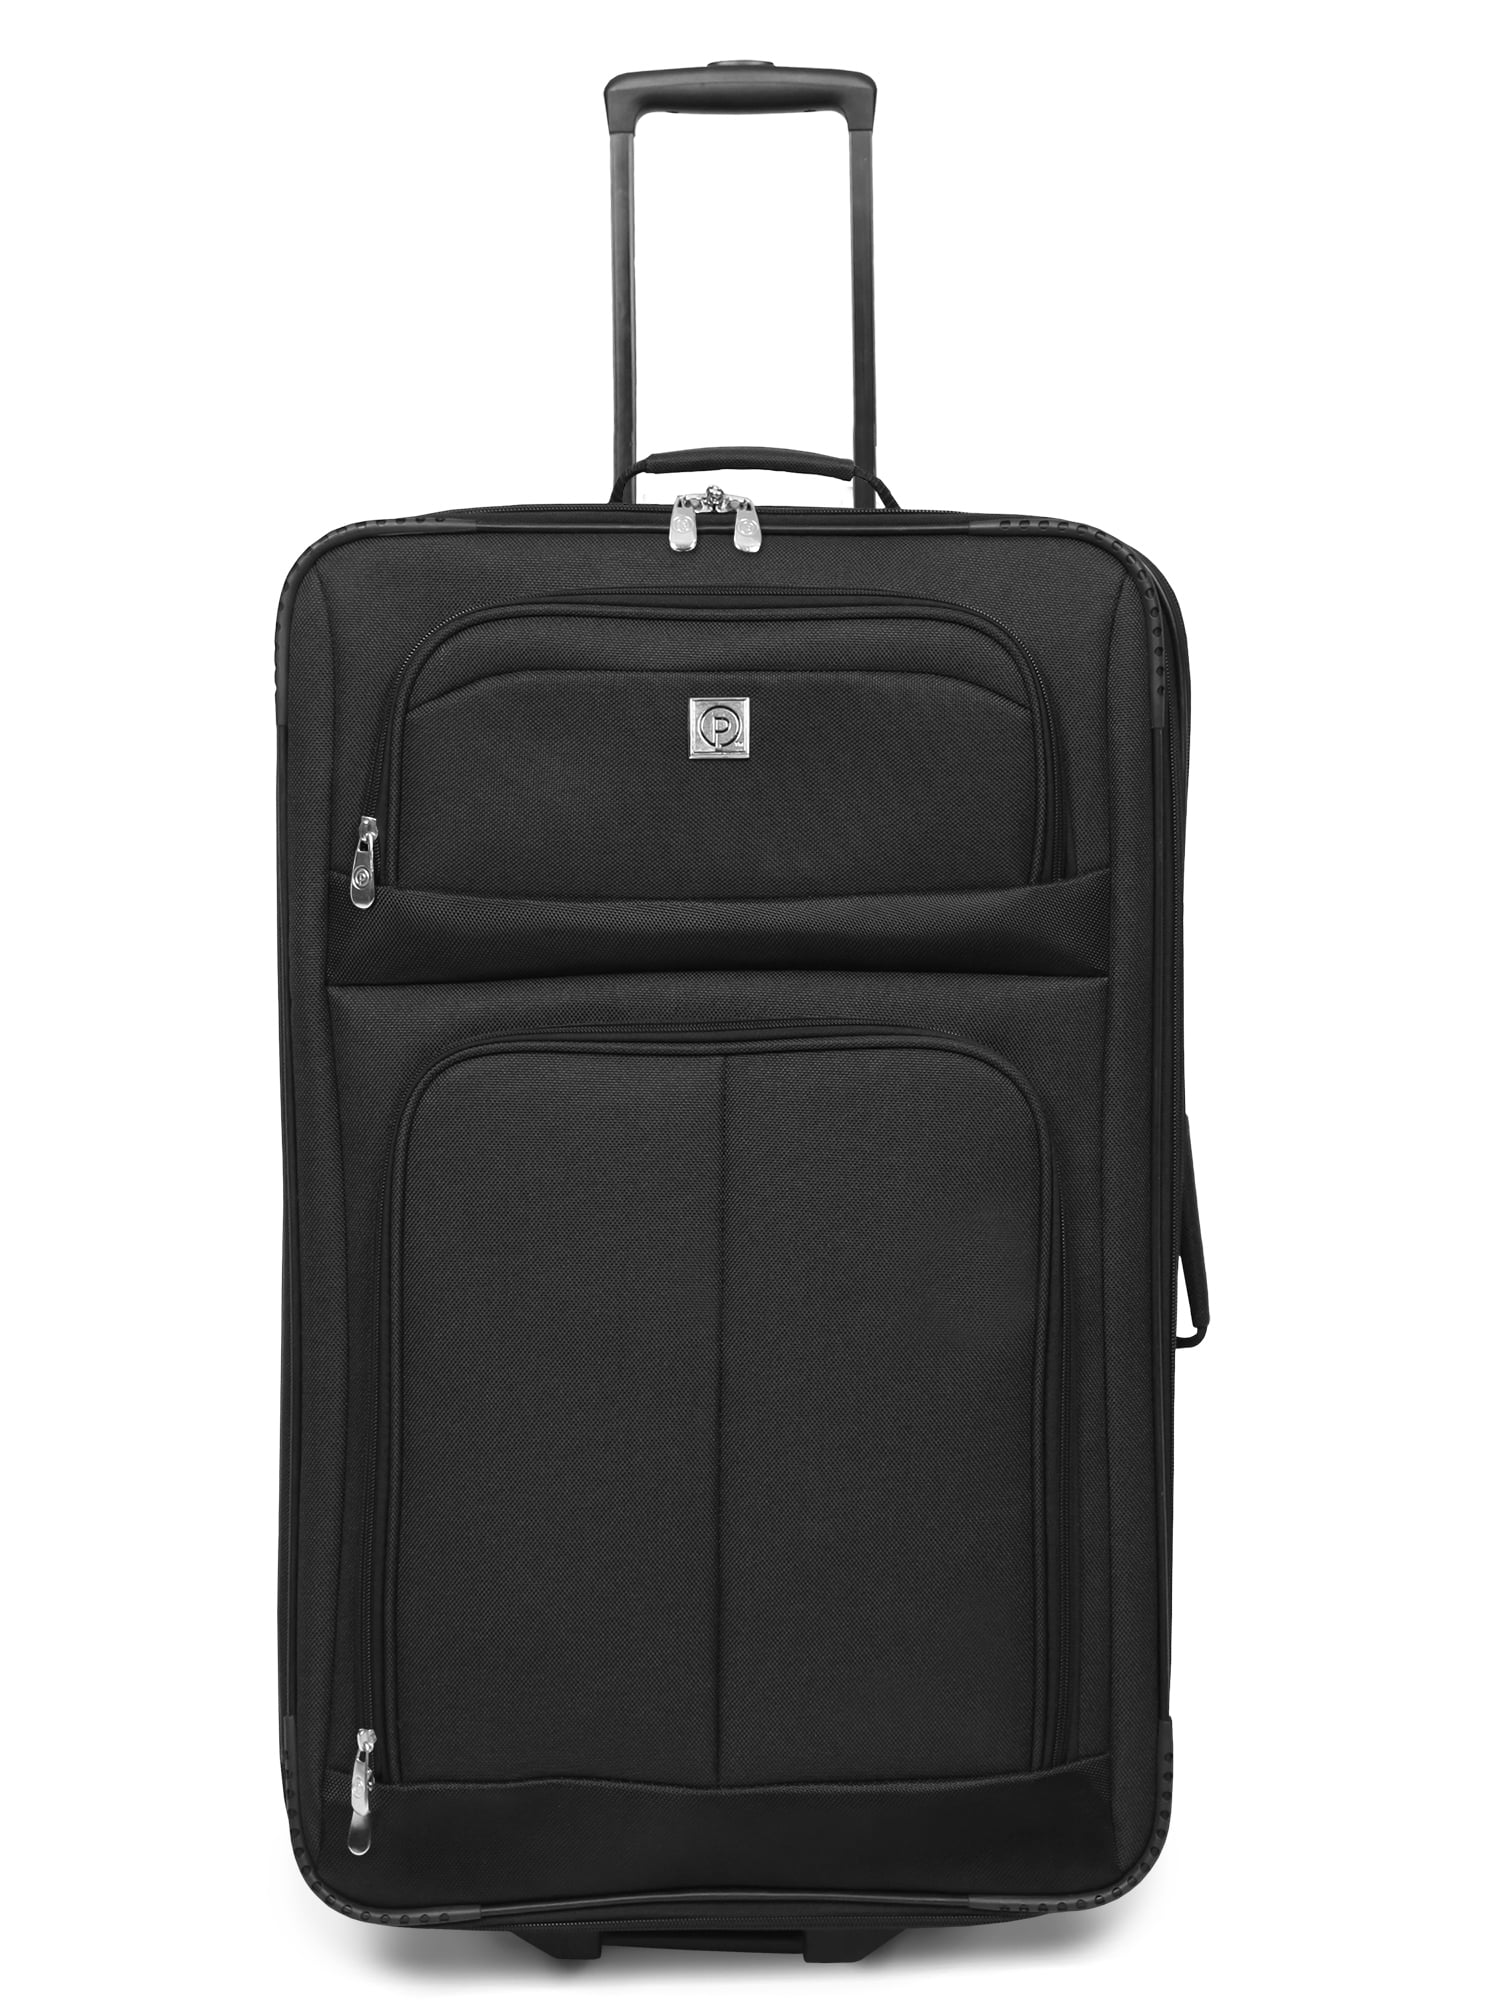 Protege 25" Regency Checked 2-Wheel Upright Luggage (Walmart Exclusive)